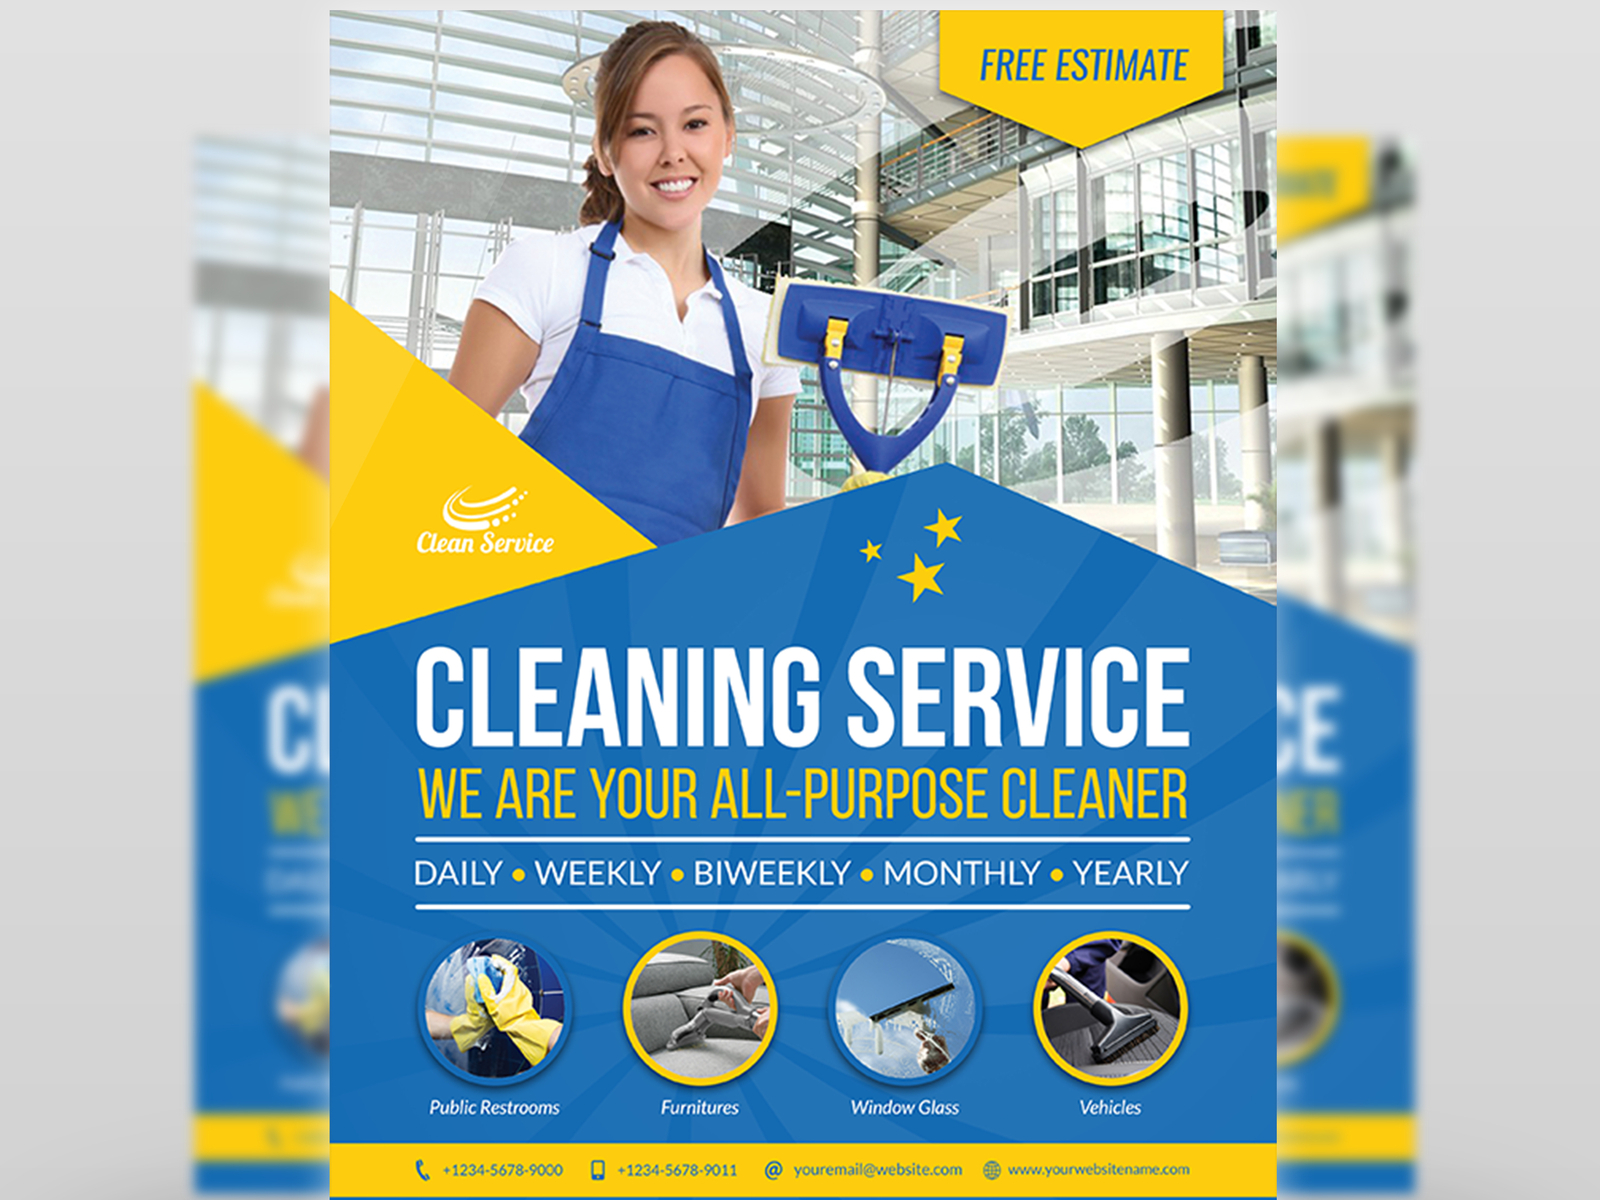 Cleaning Services Flyer Template by OWPictures on Dribbble Intended For Cleaning Company Flyers Template